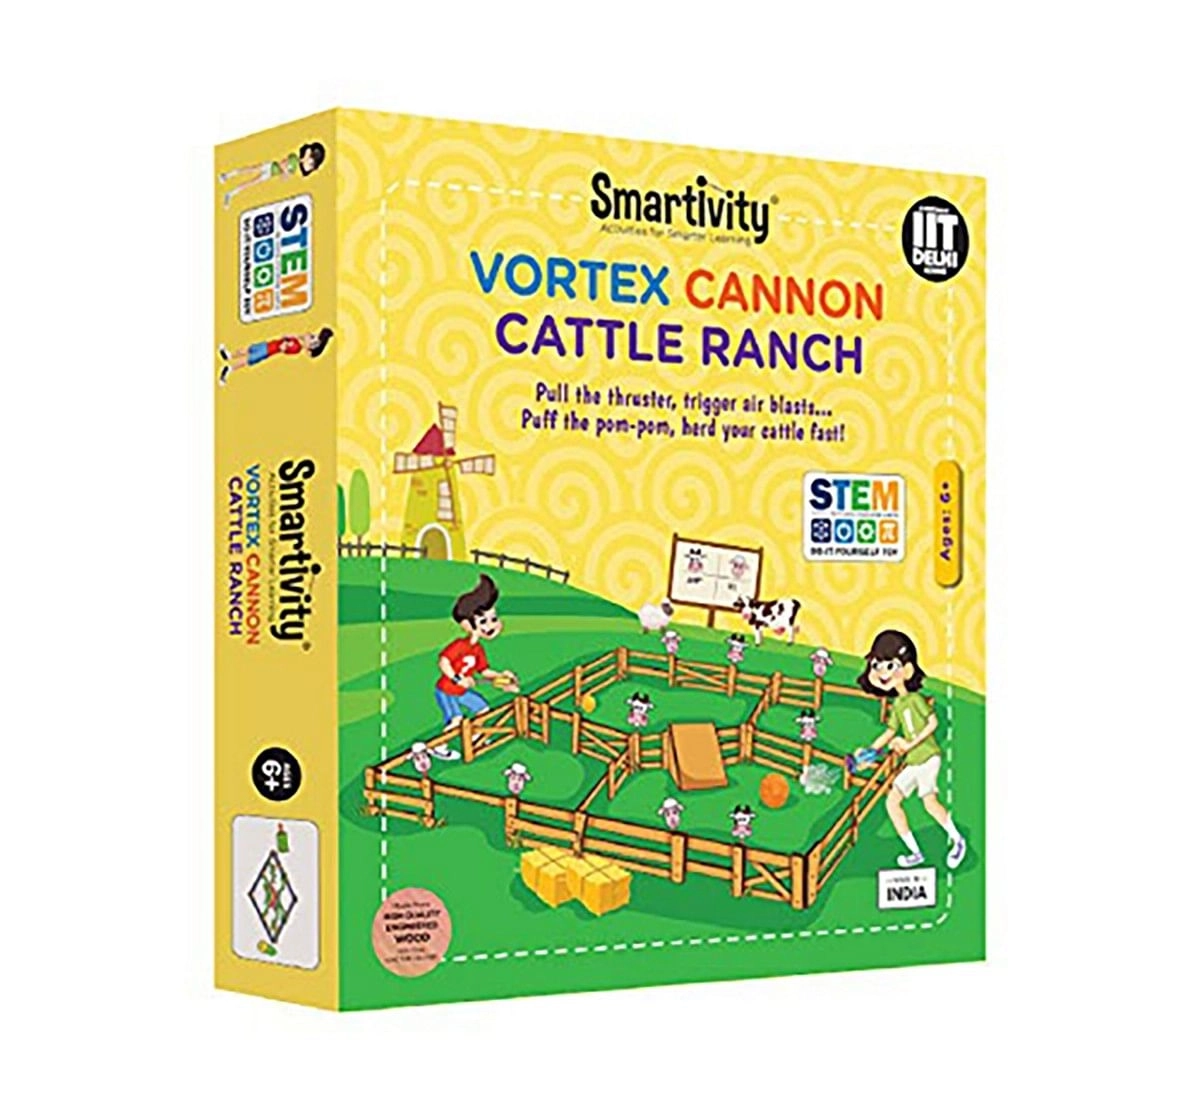 Smartivity Vortex Cannon Cattle Ranch: Stem, Learning, Educational and Construction Activity Toy Gift for Kids age 6Y+ 